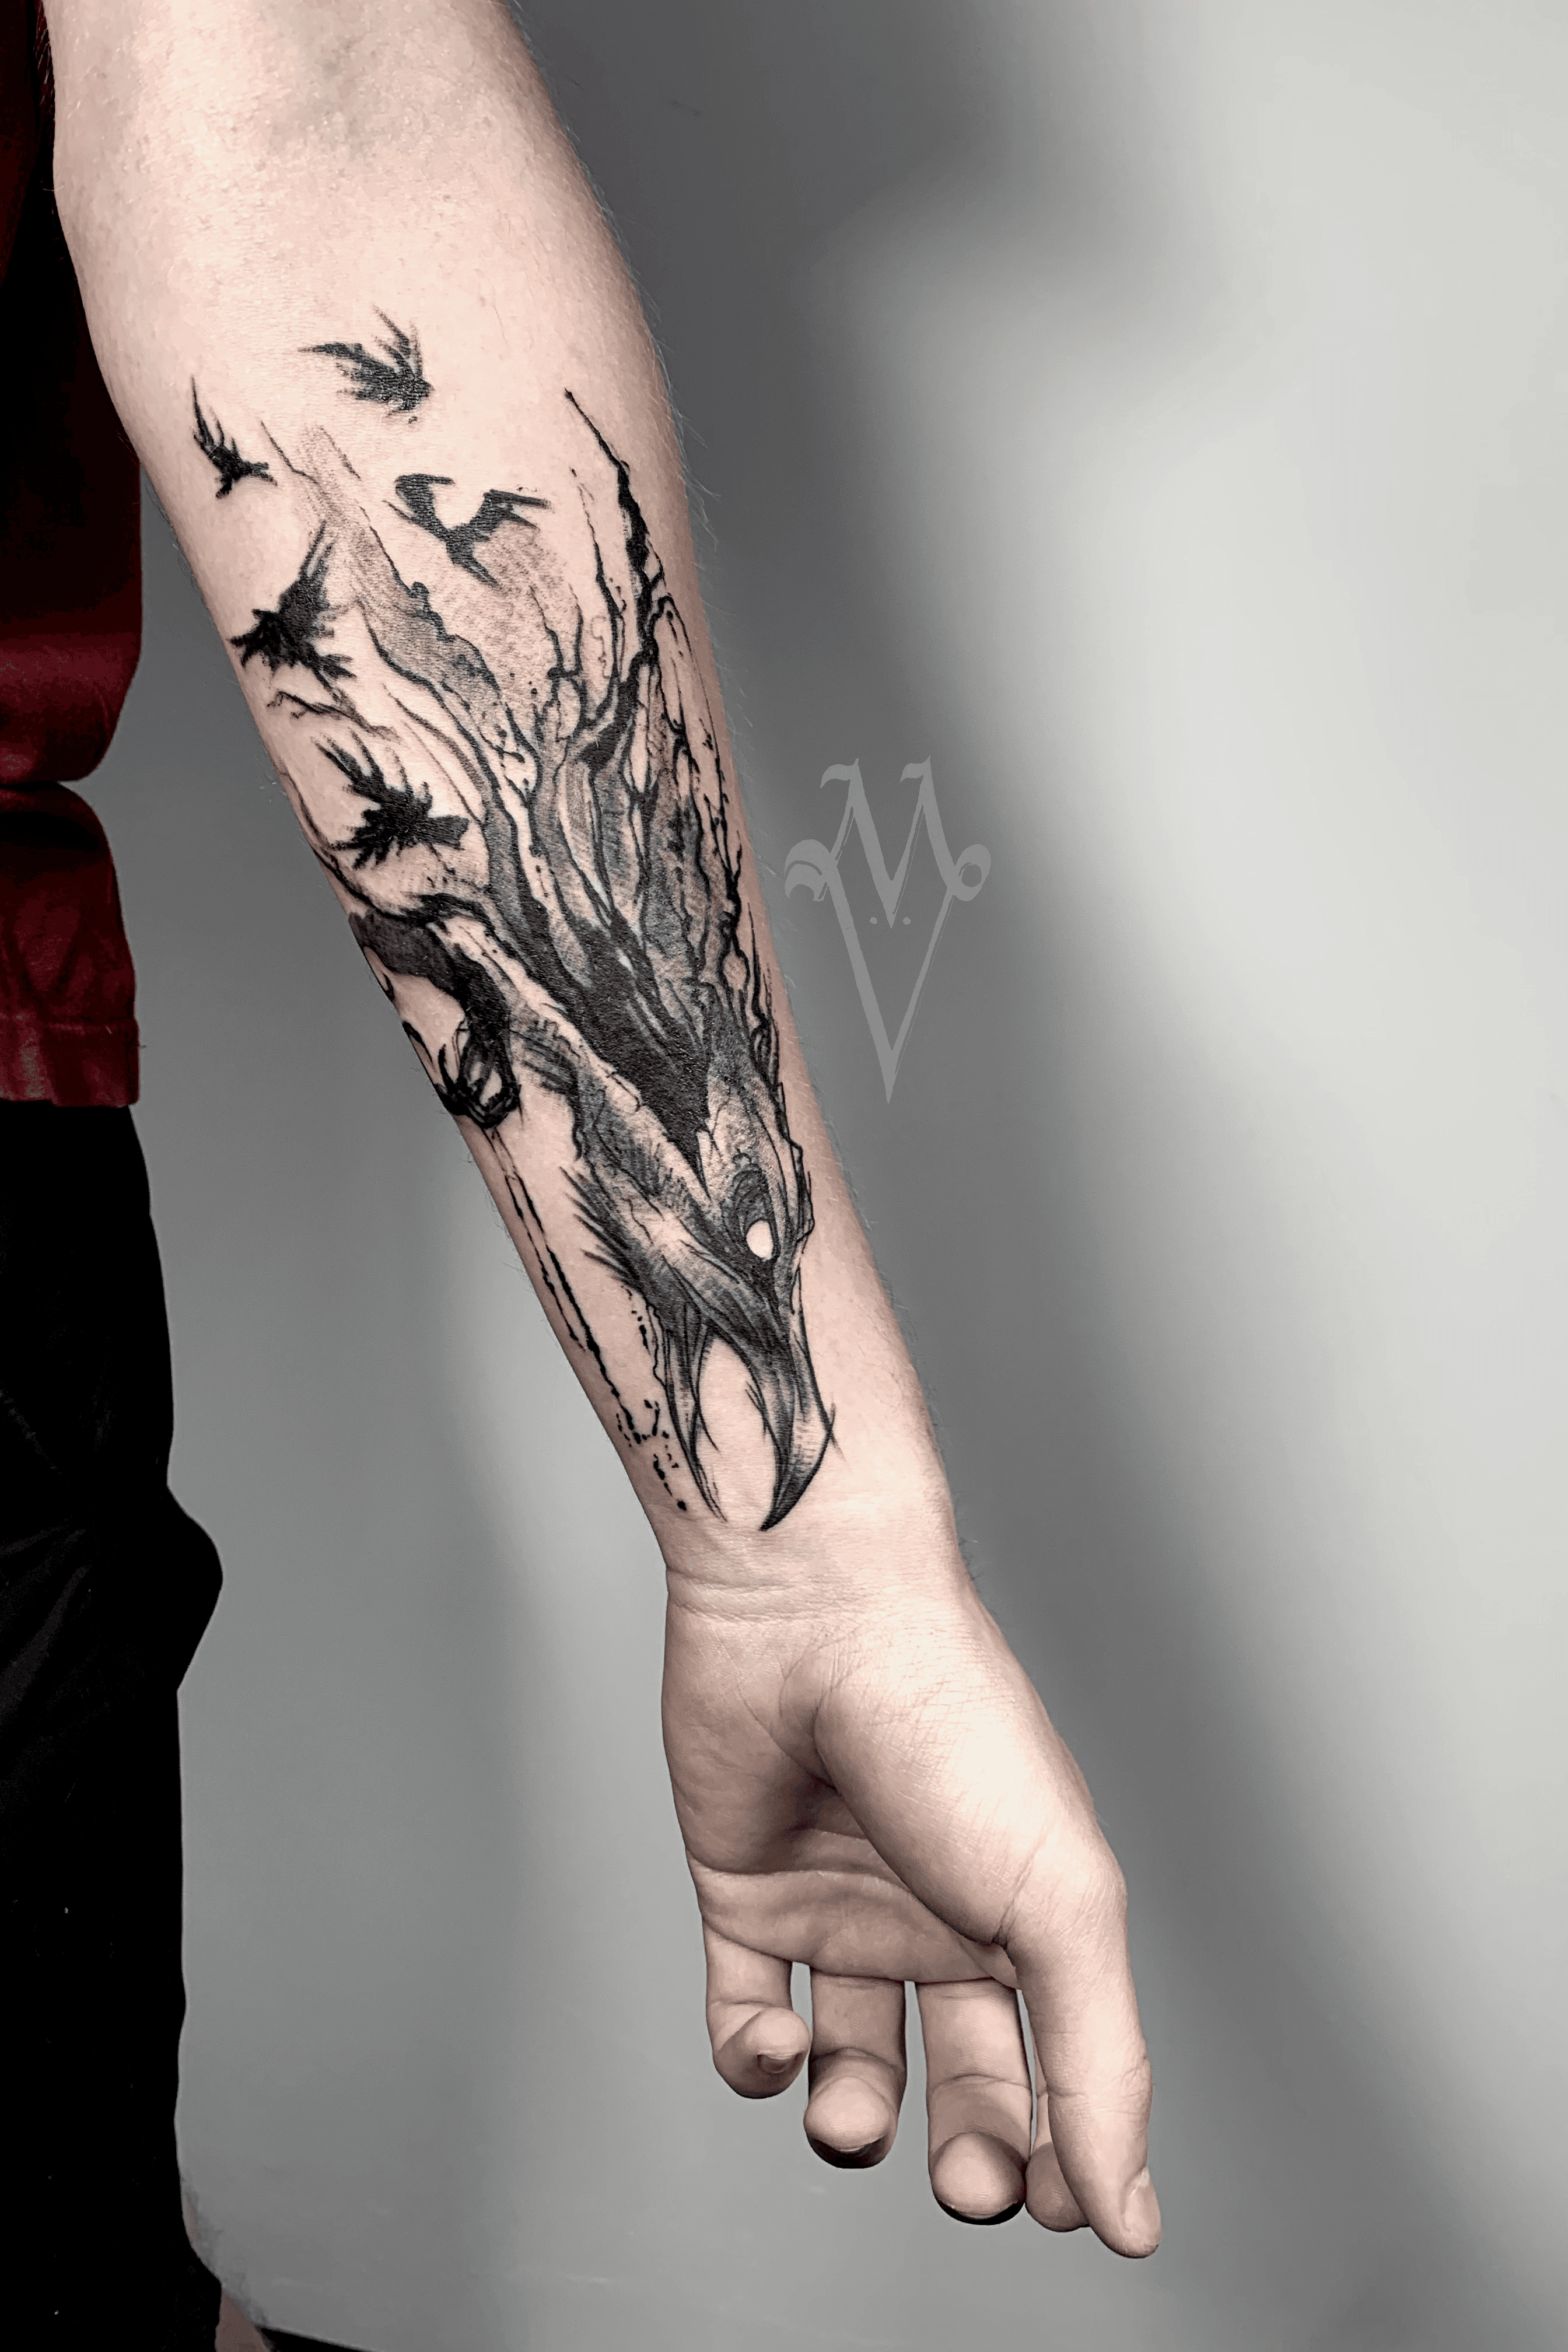 79 Fashionable and Intriguing Sketch Tattoo Ideas For Your Next Ink